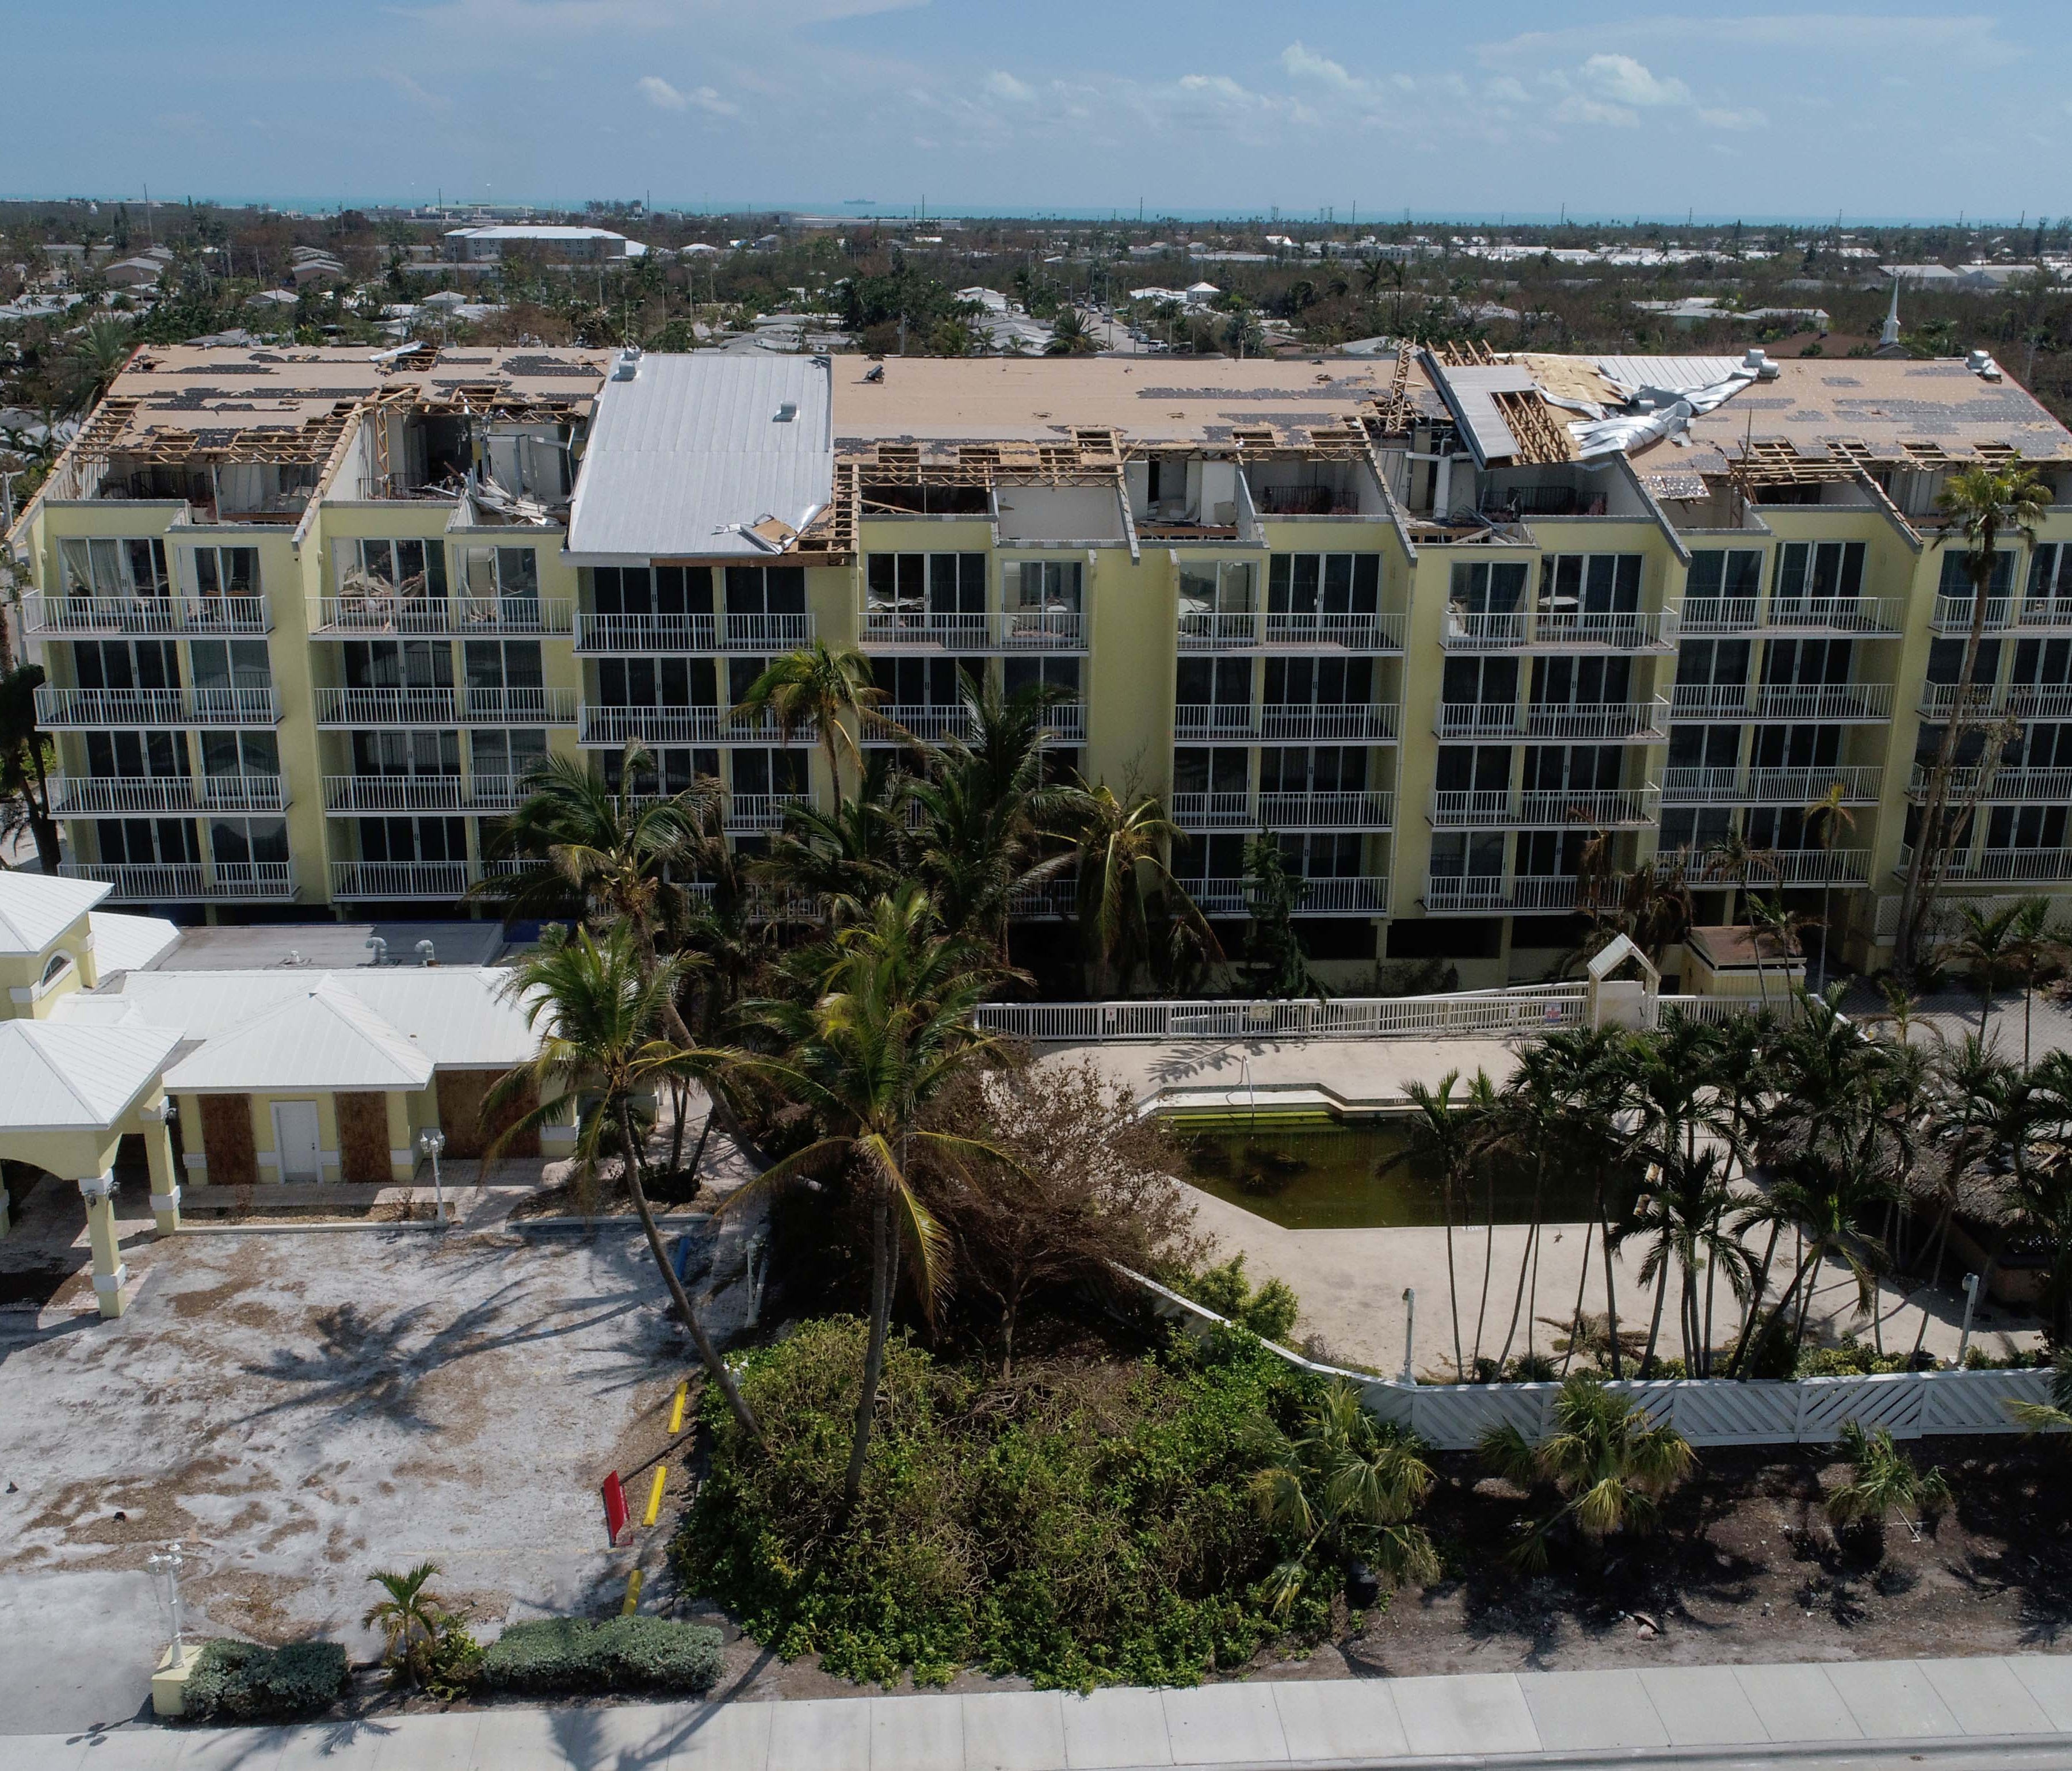 Sections of the roof are seen peeled off on the Bayside Hotel on Sept. 13, 2017, in Key West, Fla., after Hurricane Irma.